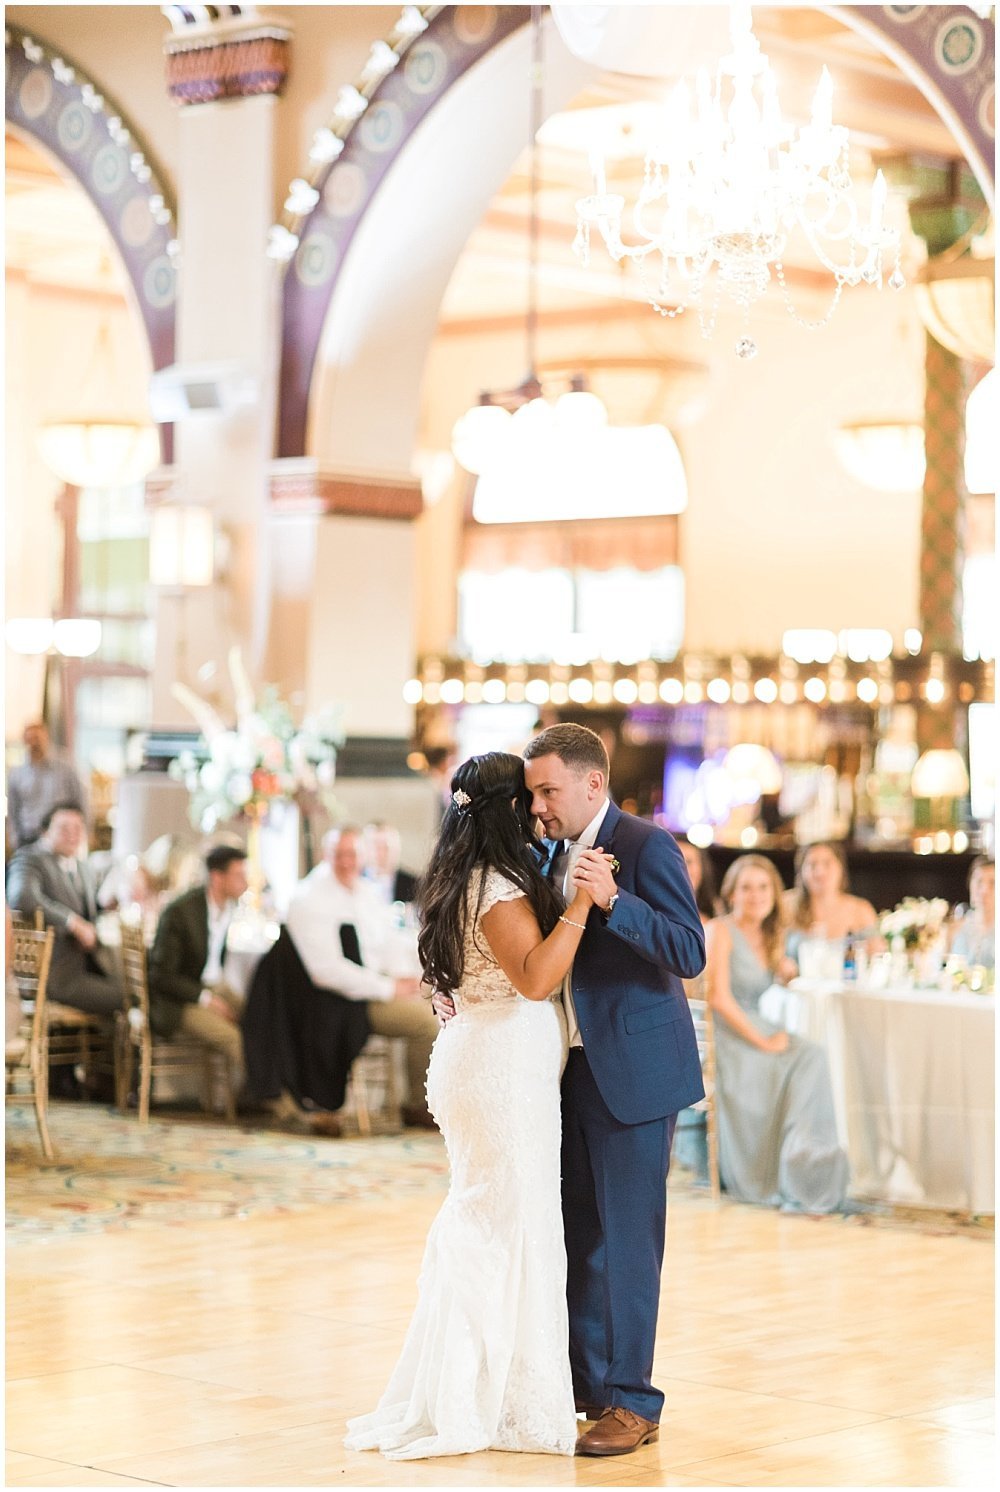 Summer-Mexican-Inspired-Gold-And-Floral-Crowne-Plaza-Indianapolis-Downtown-Union-Station-Wedding-Cory-Jackie-Wedding-Photographers-Jessica-Dum-Wedding-Coordination_photo___0045